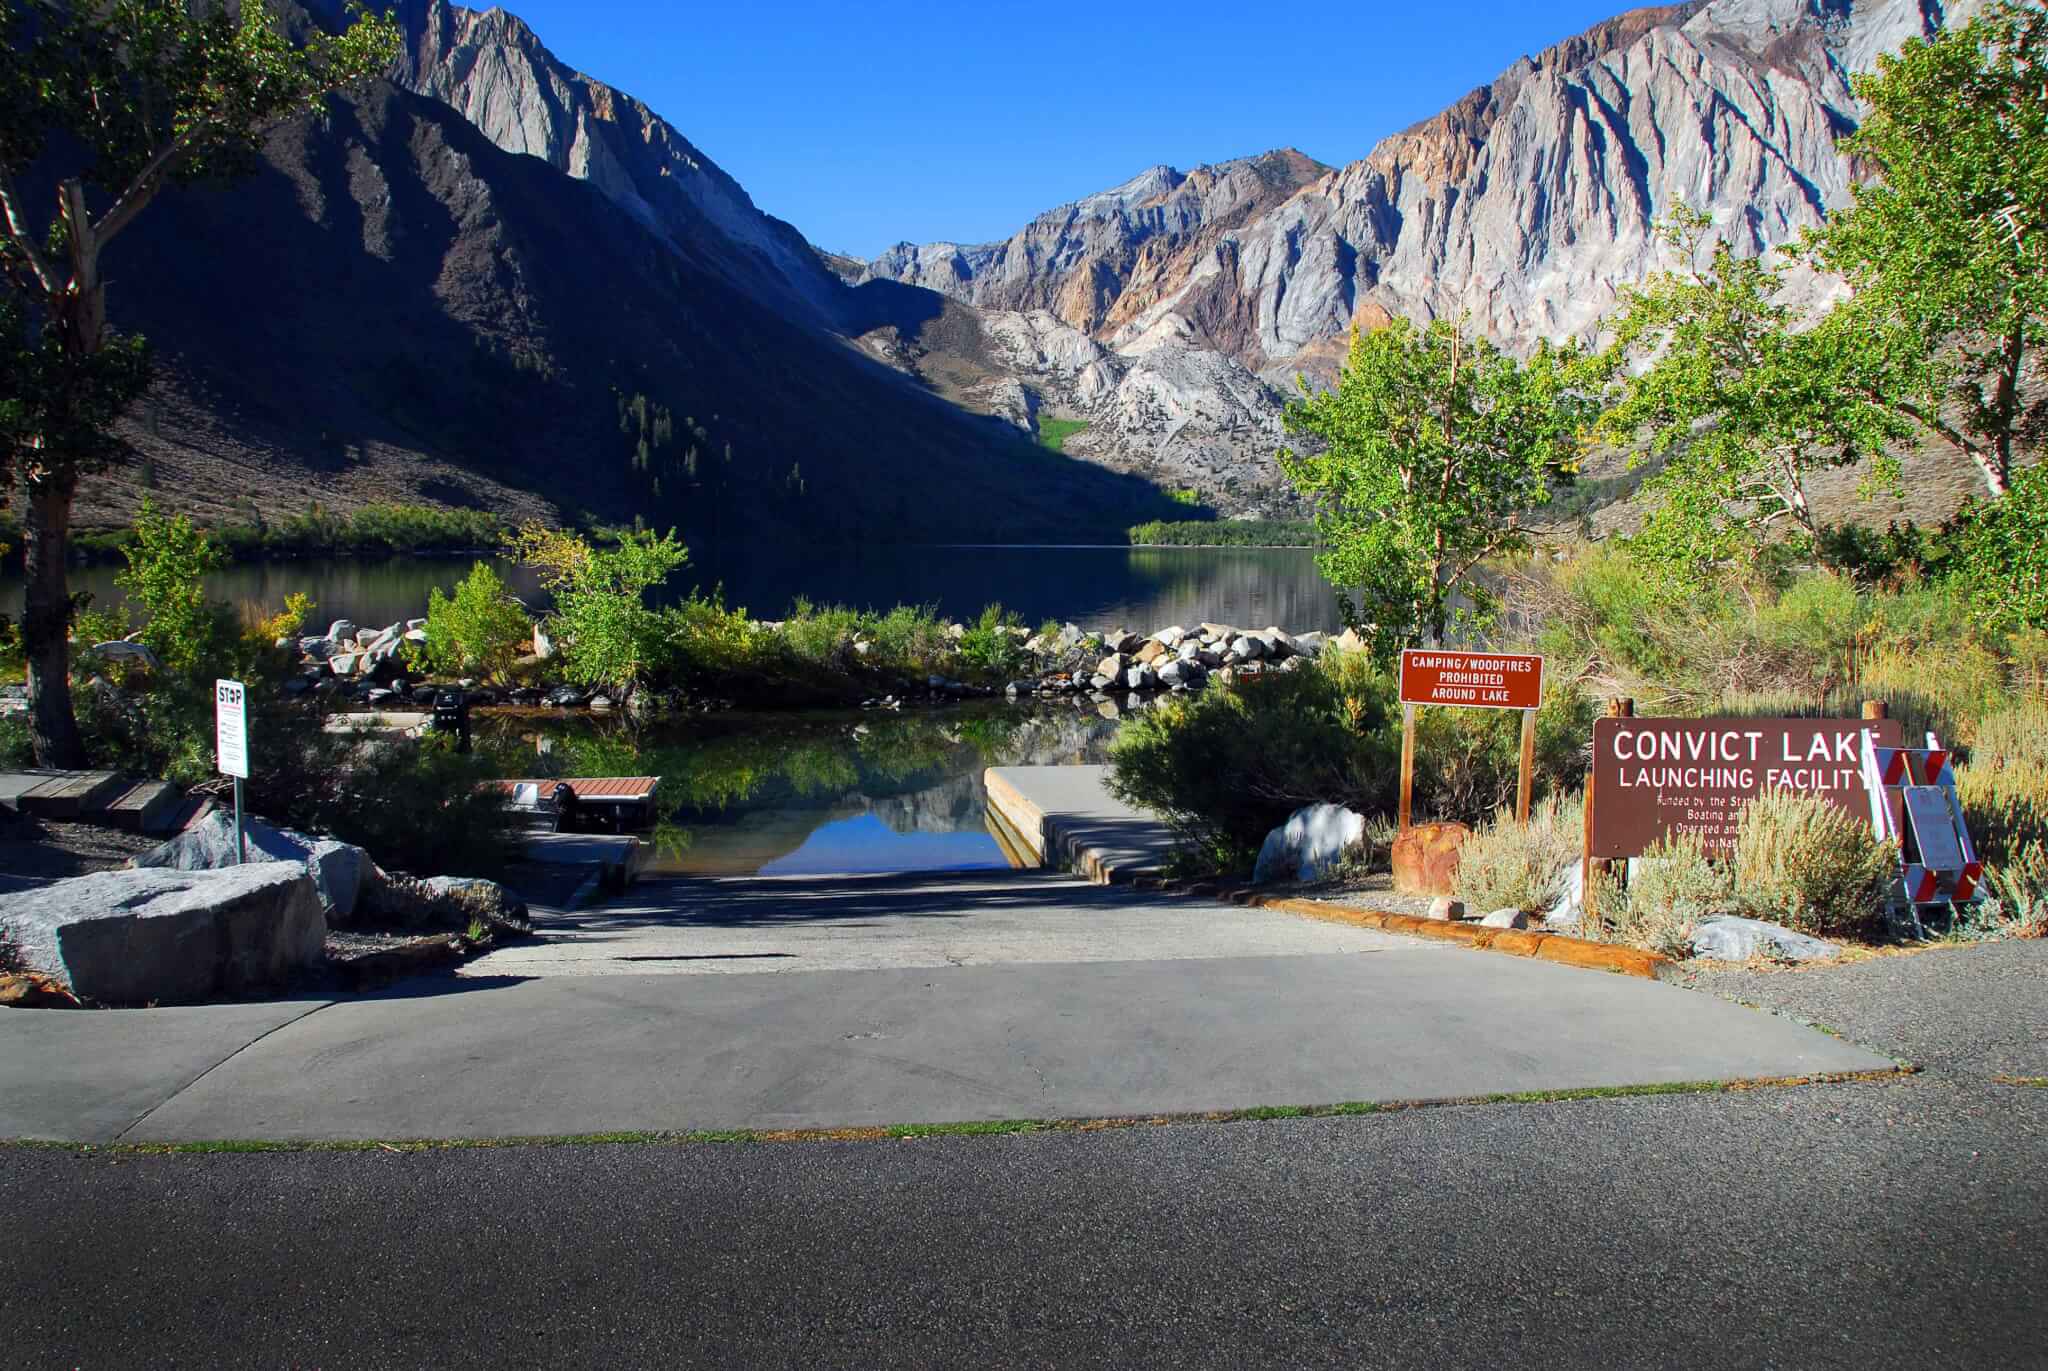 The Best Mammoth Lakes Area Campgrounds Convict Lake Boat Ramp